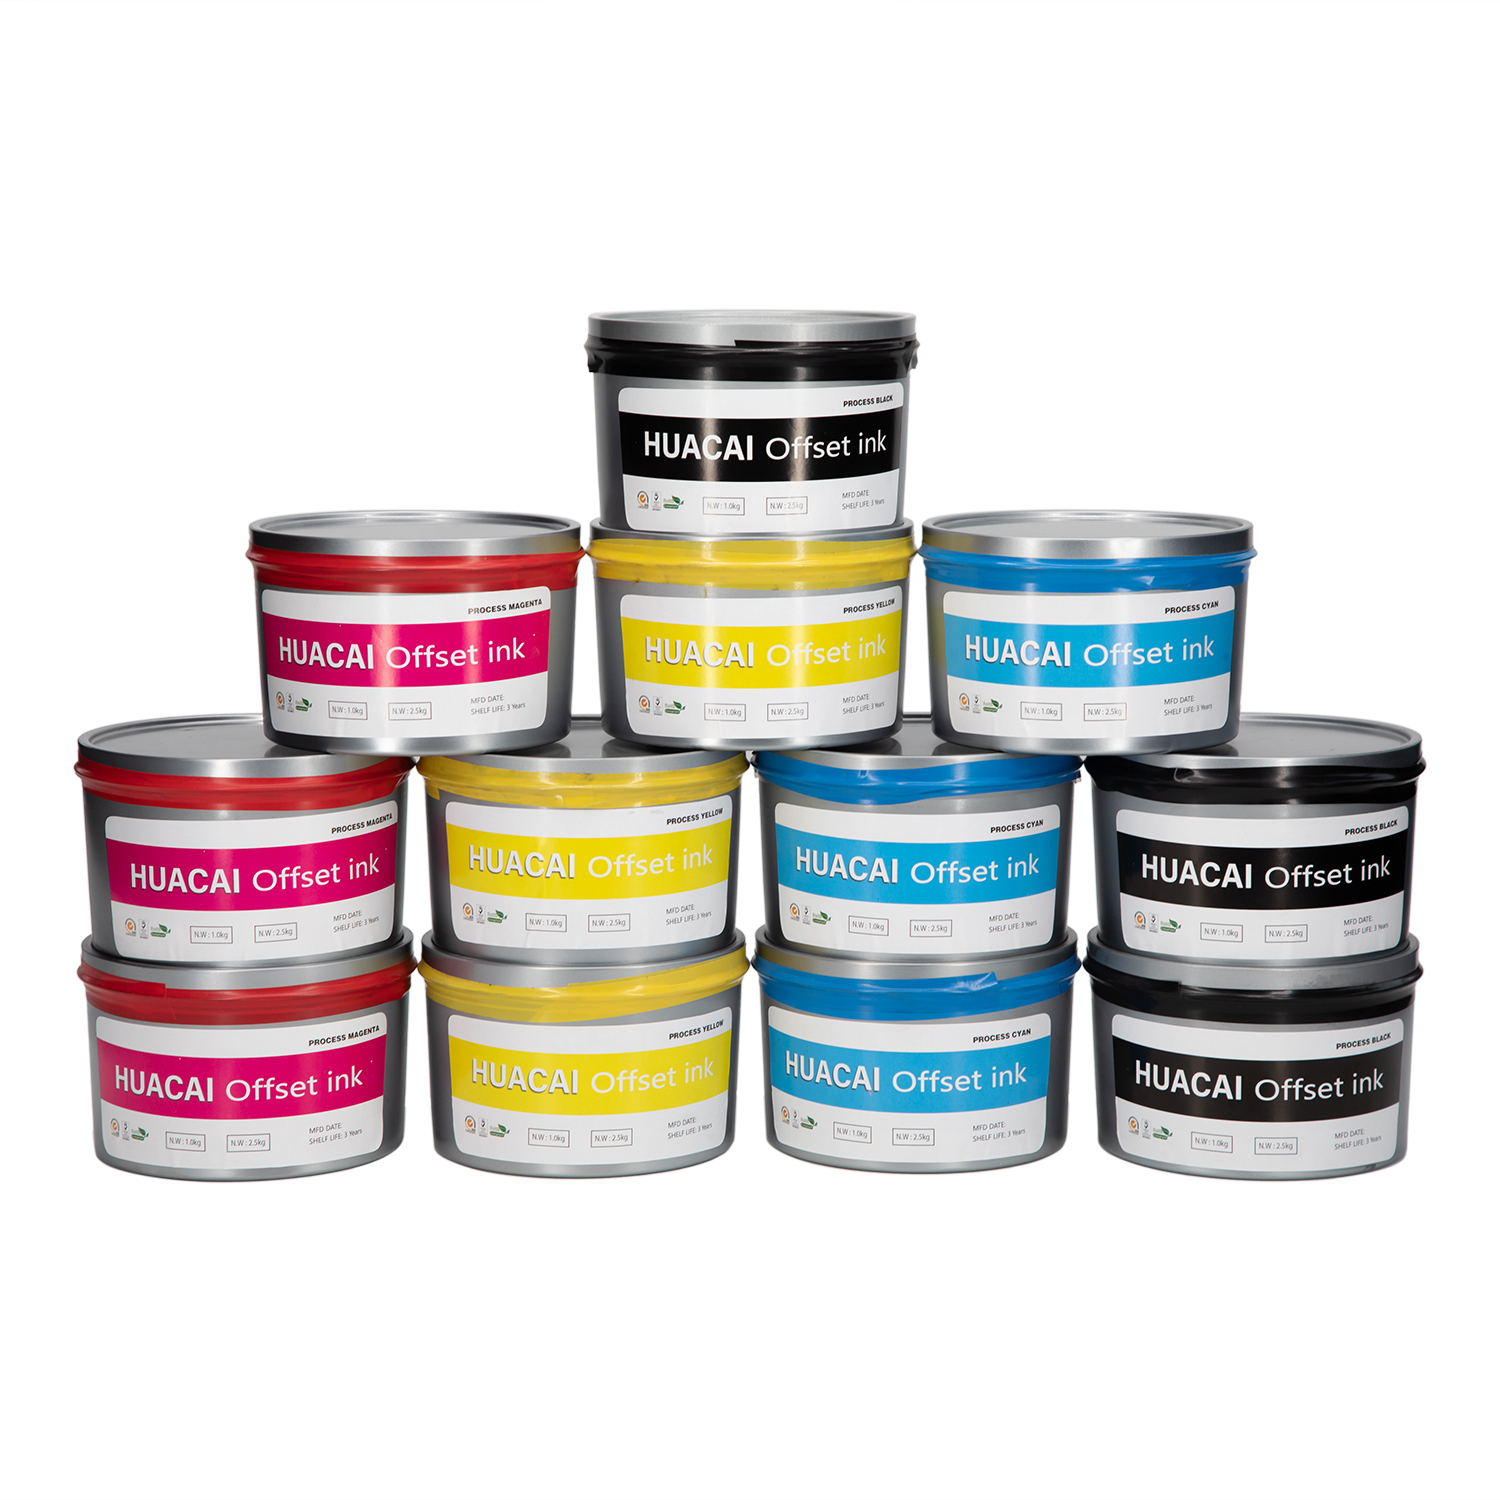 sheeted offset printing ink about process 4 color offset ink